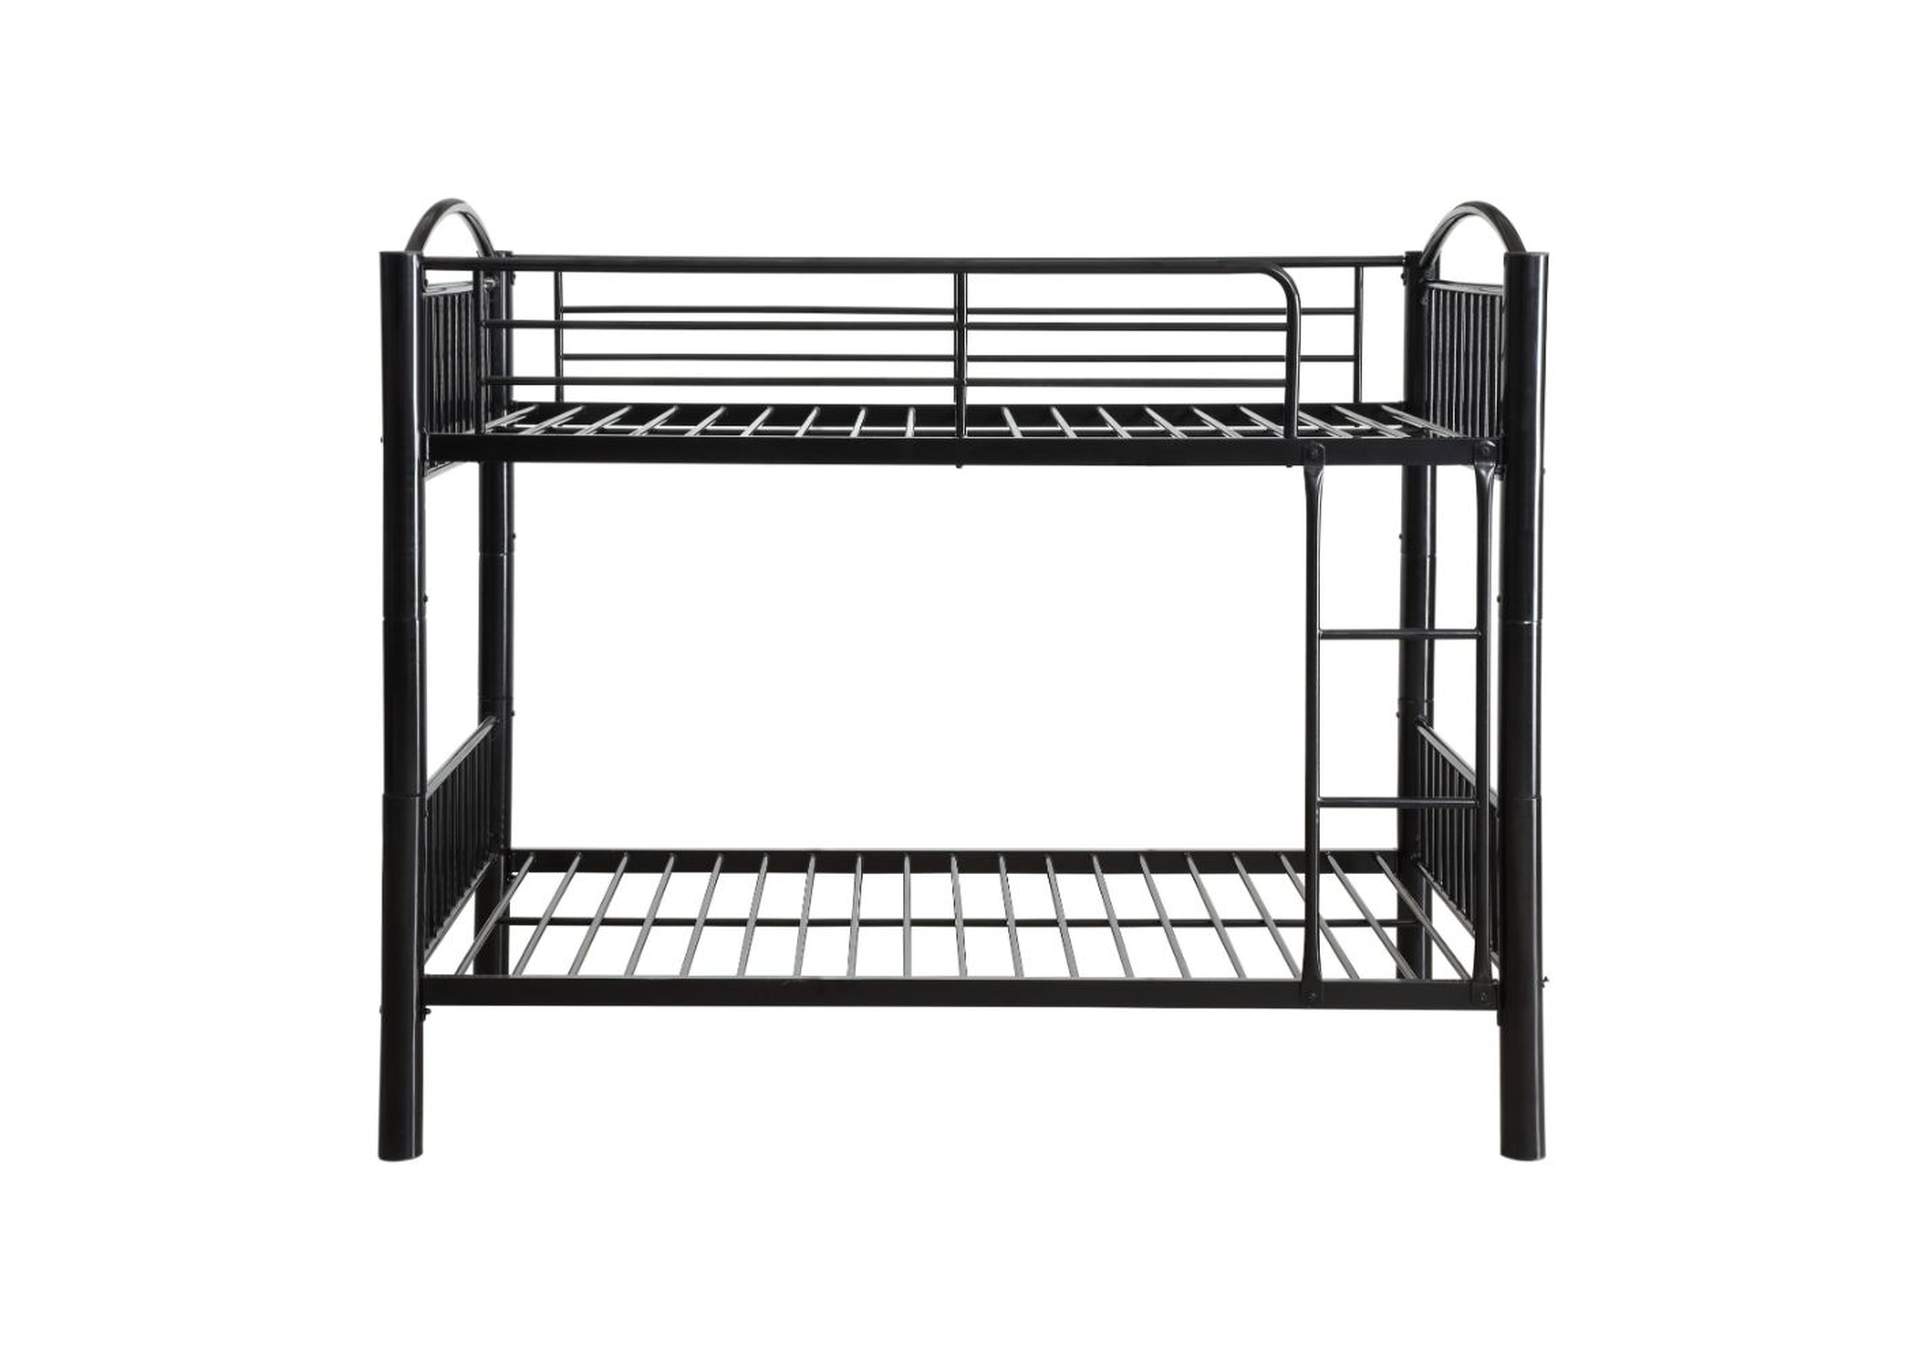 Cayelynn Black Twin/Twin Bunk Bed,Acme